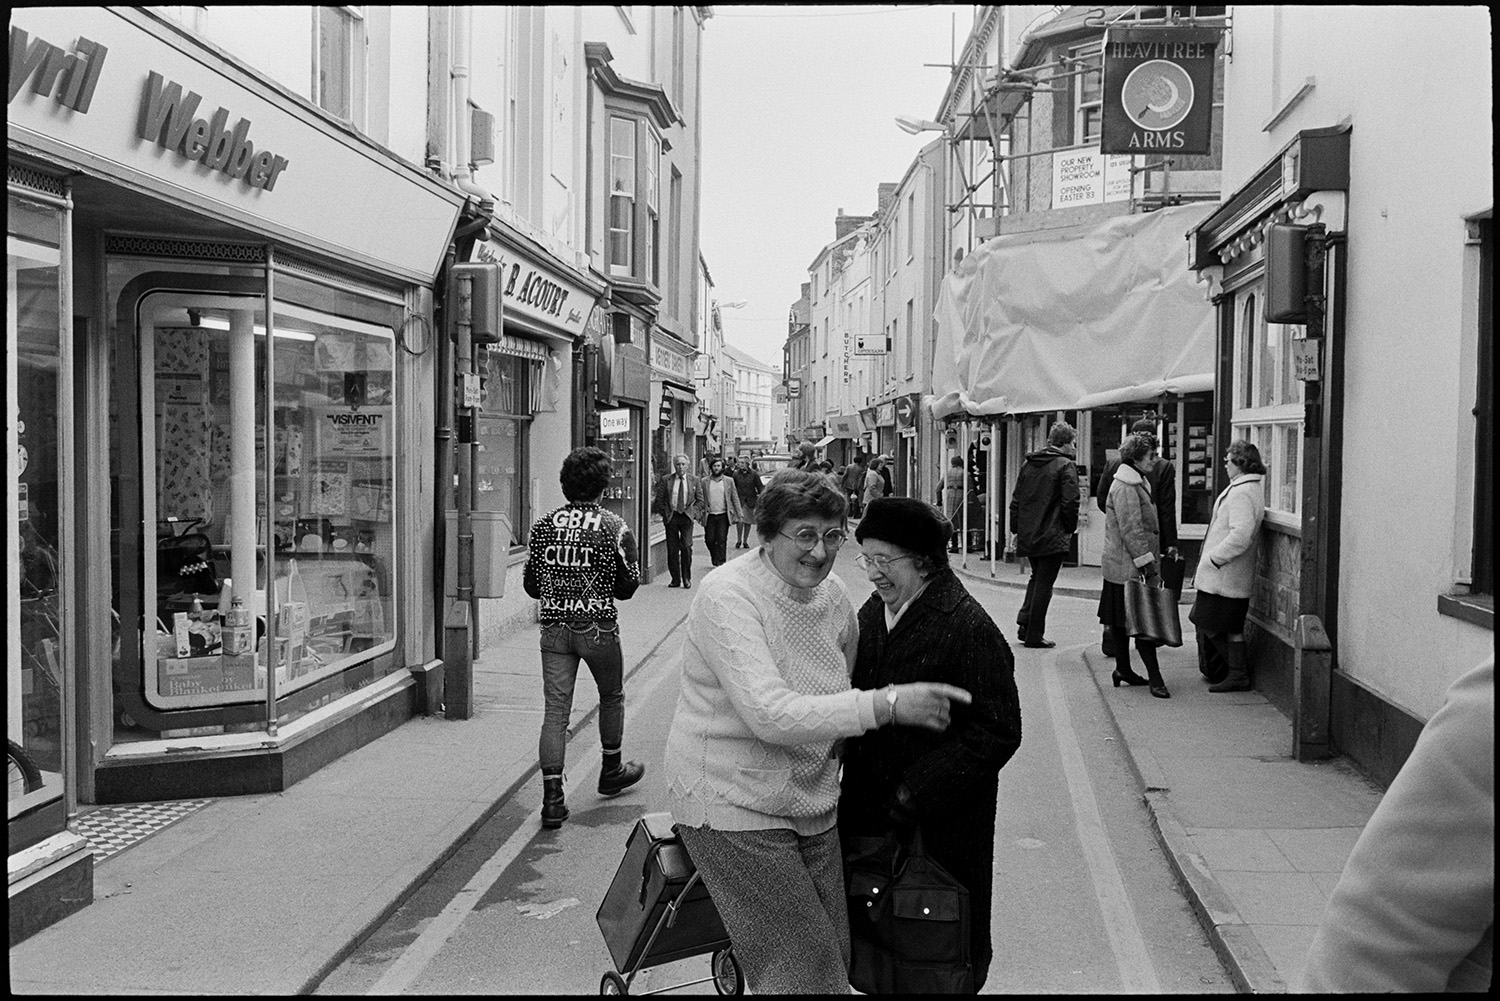 Street scenes, people chatting outside pub. 
[Two women talking and laughing in the street outside the Heavitree Arms pub in Mill Street, Bideford. One of them is pulling a shopping trolley. Other shoppers can be seen in the street, including a person wearing a jacket with the logo of the Torrington punk rock bank, The Cult Maniax. Shop fronts of Cyril Webber and B A Court are visible.]